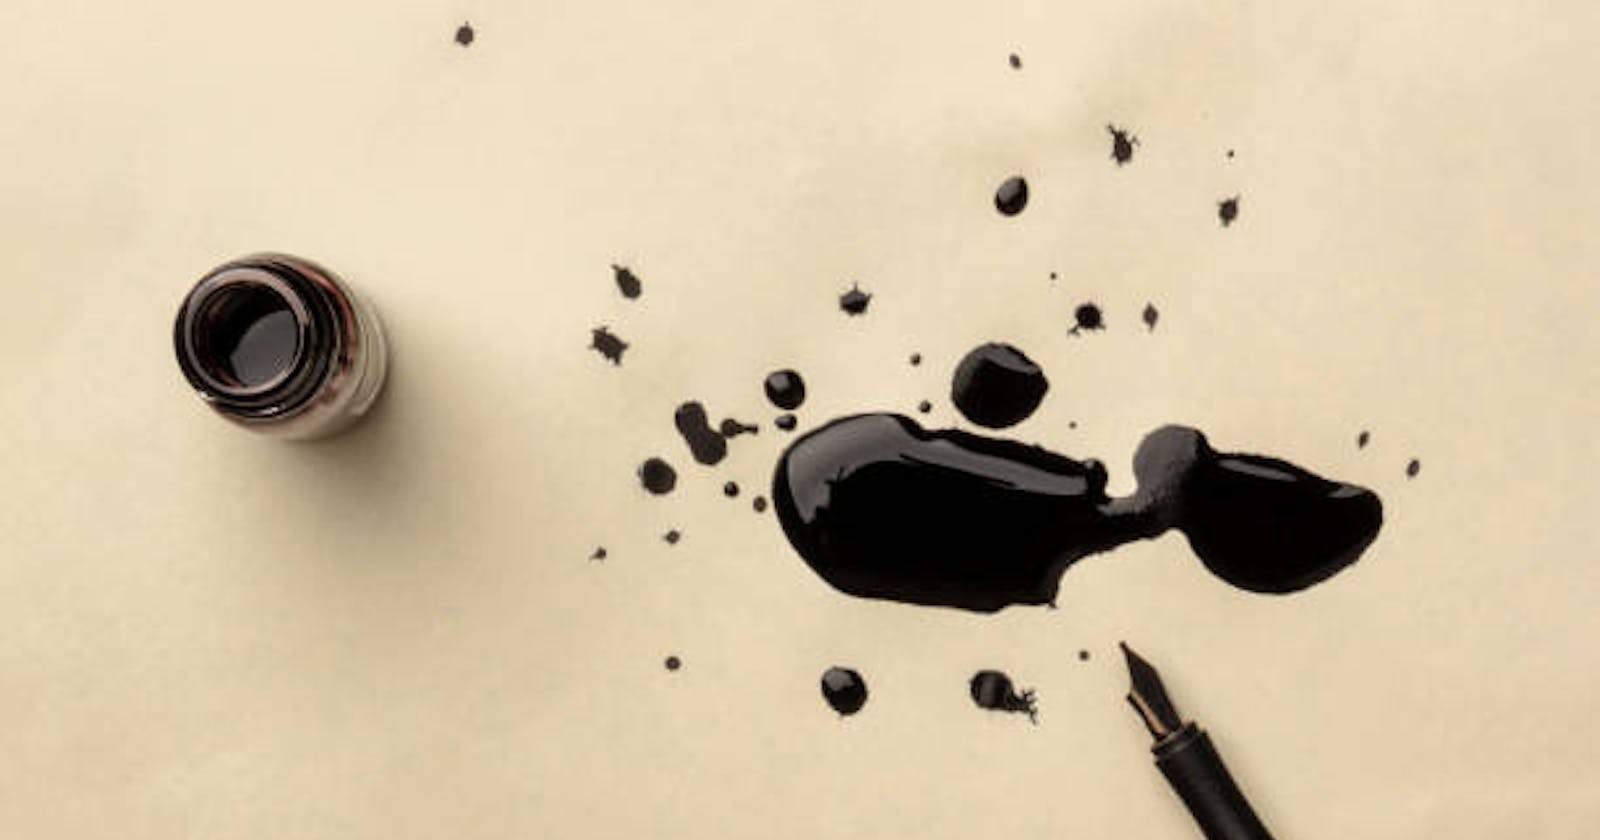 Global Ink Market Size, Share, Analysis, Key Players, Latest Insights, Opportunity and Forecast to 2027